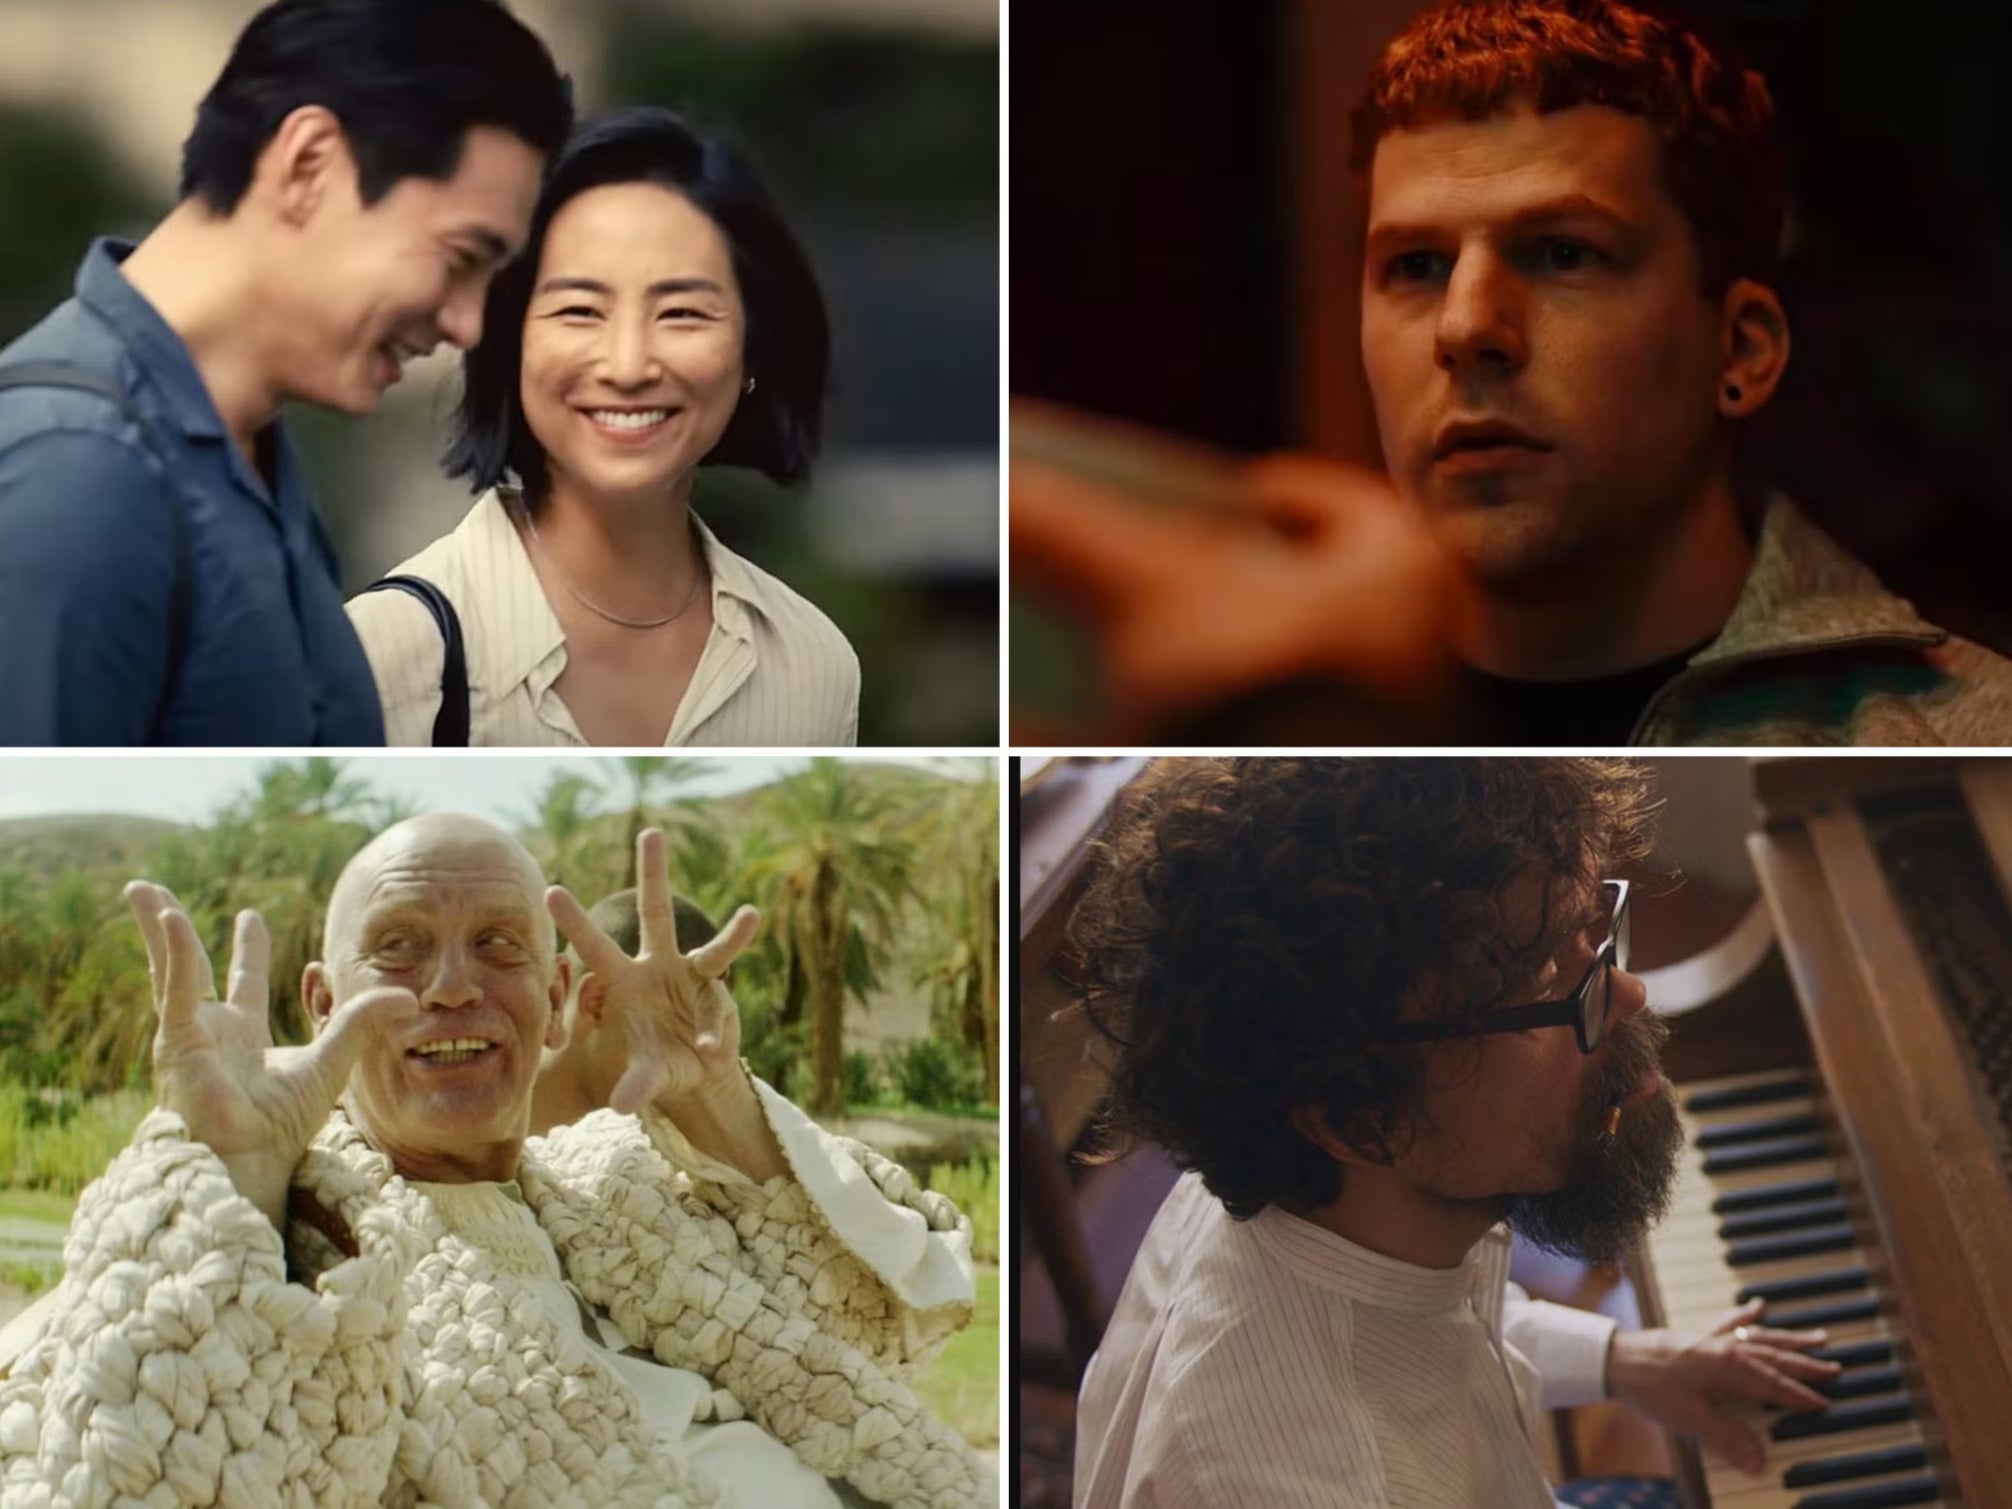 Teo Yoo and Greta Lee in ‘Past Lives, Jesse Eisenberg in ‘Manodrome’, John Malkovich in ‘Seneca – On the Creation of Earthquakes’ and Peter Dinklage in ‘She Came to Me’